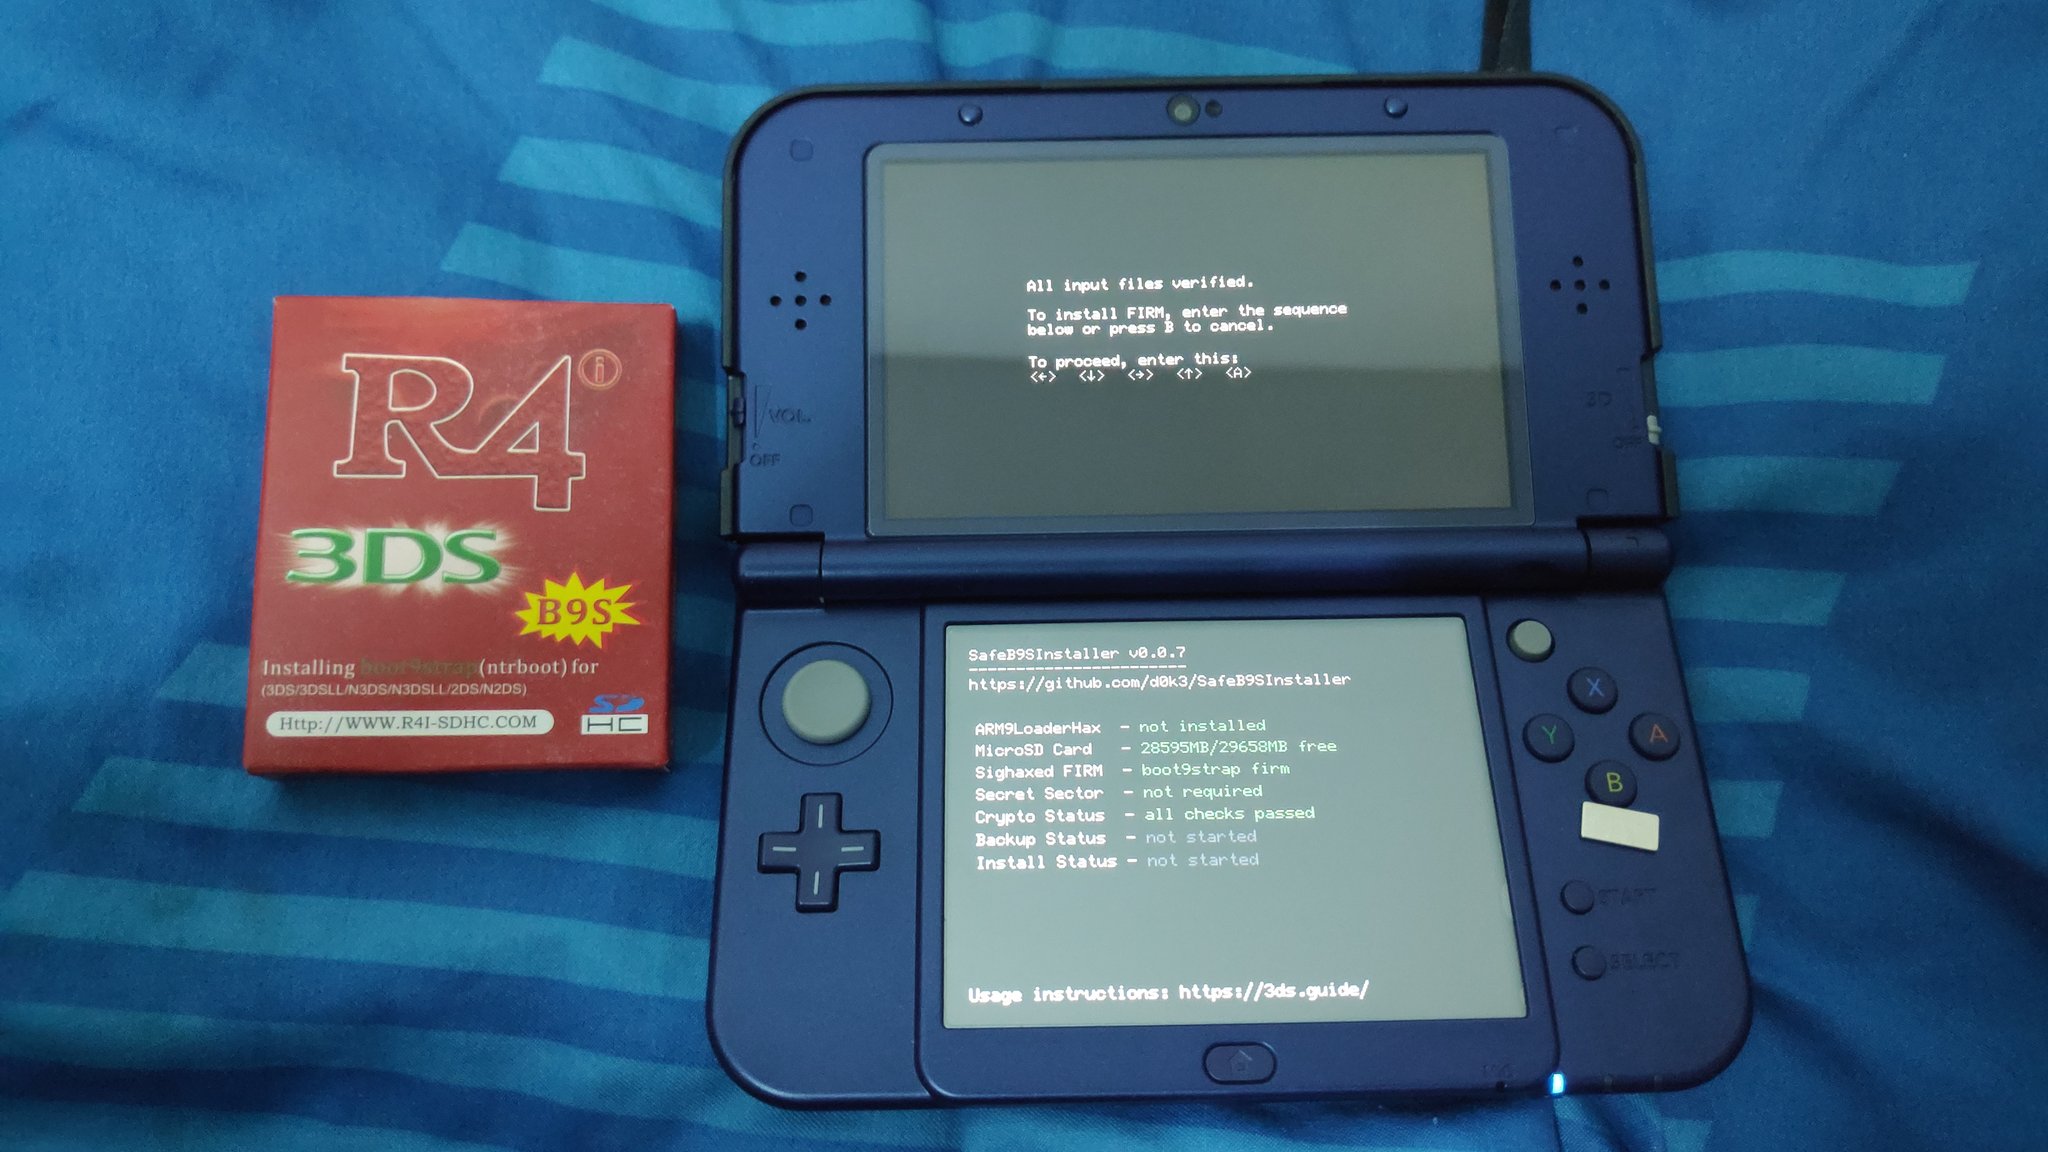 ChaorruptedX on Twitter: "Looks like I'm to the party. 🎮🐦 [New Nintendo 3DS XL] #LatetotheParty #Hack #R4i #R4 #3DS #boot9strap #B9S #ntrboot #Luma3DS #Homebrew #CustomFirmware #CFW #NewNintendo3DSXL #Nintendo3DS #Nintendo #Handheld #Game #